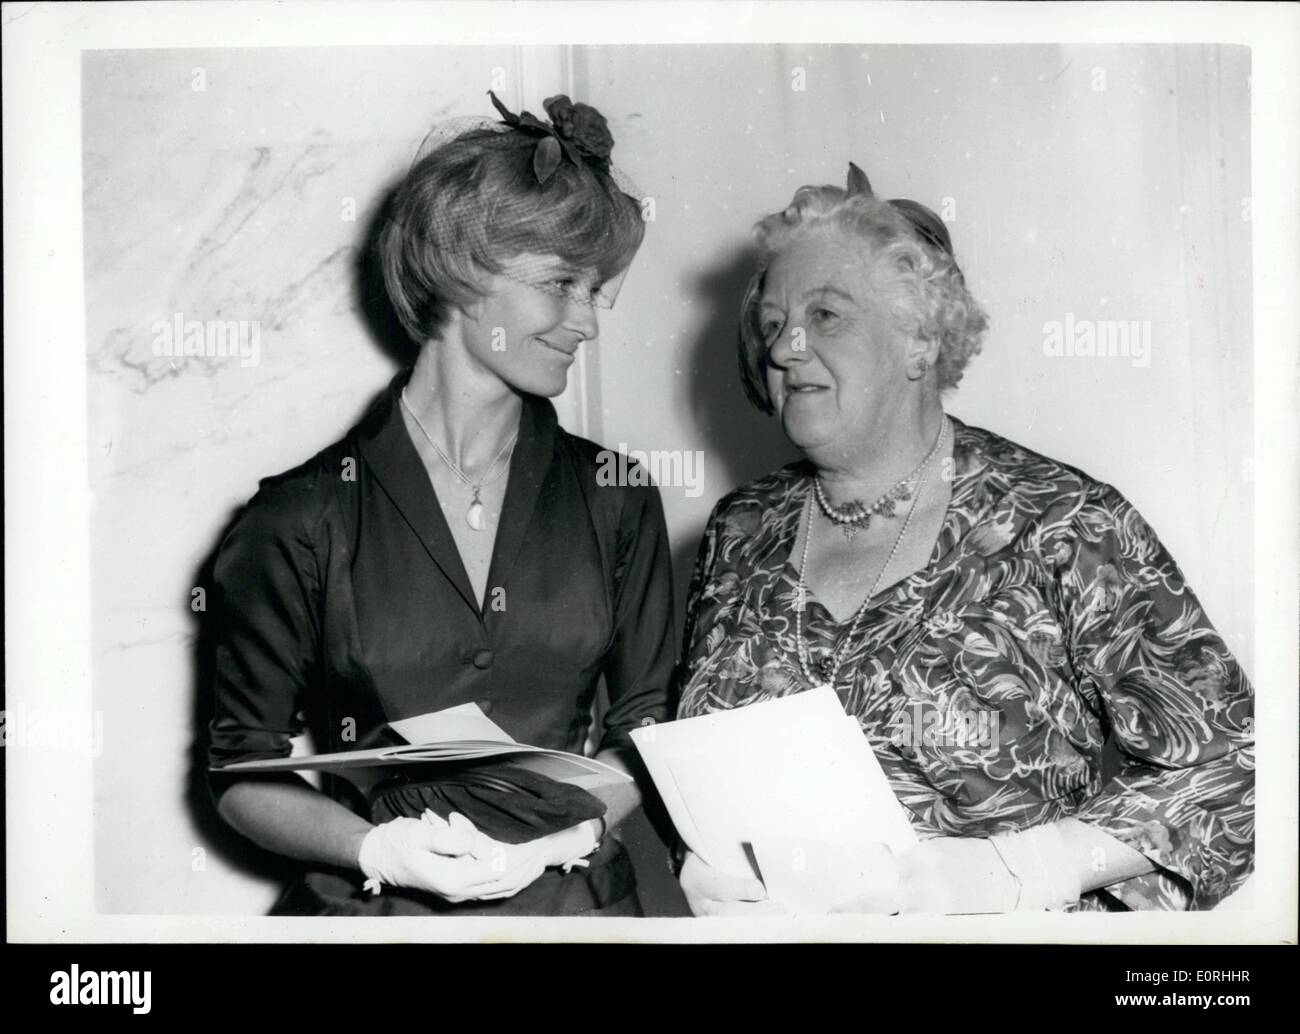 Sep. 09, 1959 - Women of the Year Luncheon, in aid of the Greater London Fund for the Blind (incorporating United Appeal for the Blind)., was held today at the Savoy Hotel. Photo shows Miss Margaret Rutherford and Miss Virginia Mokenna - two films stars, chat together at the Luncheon. Stock Photo